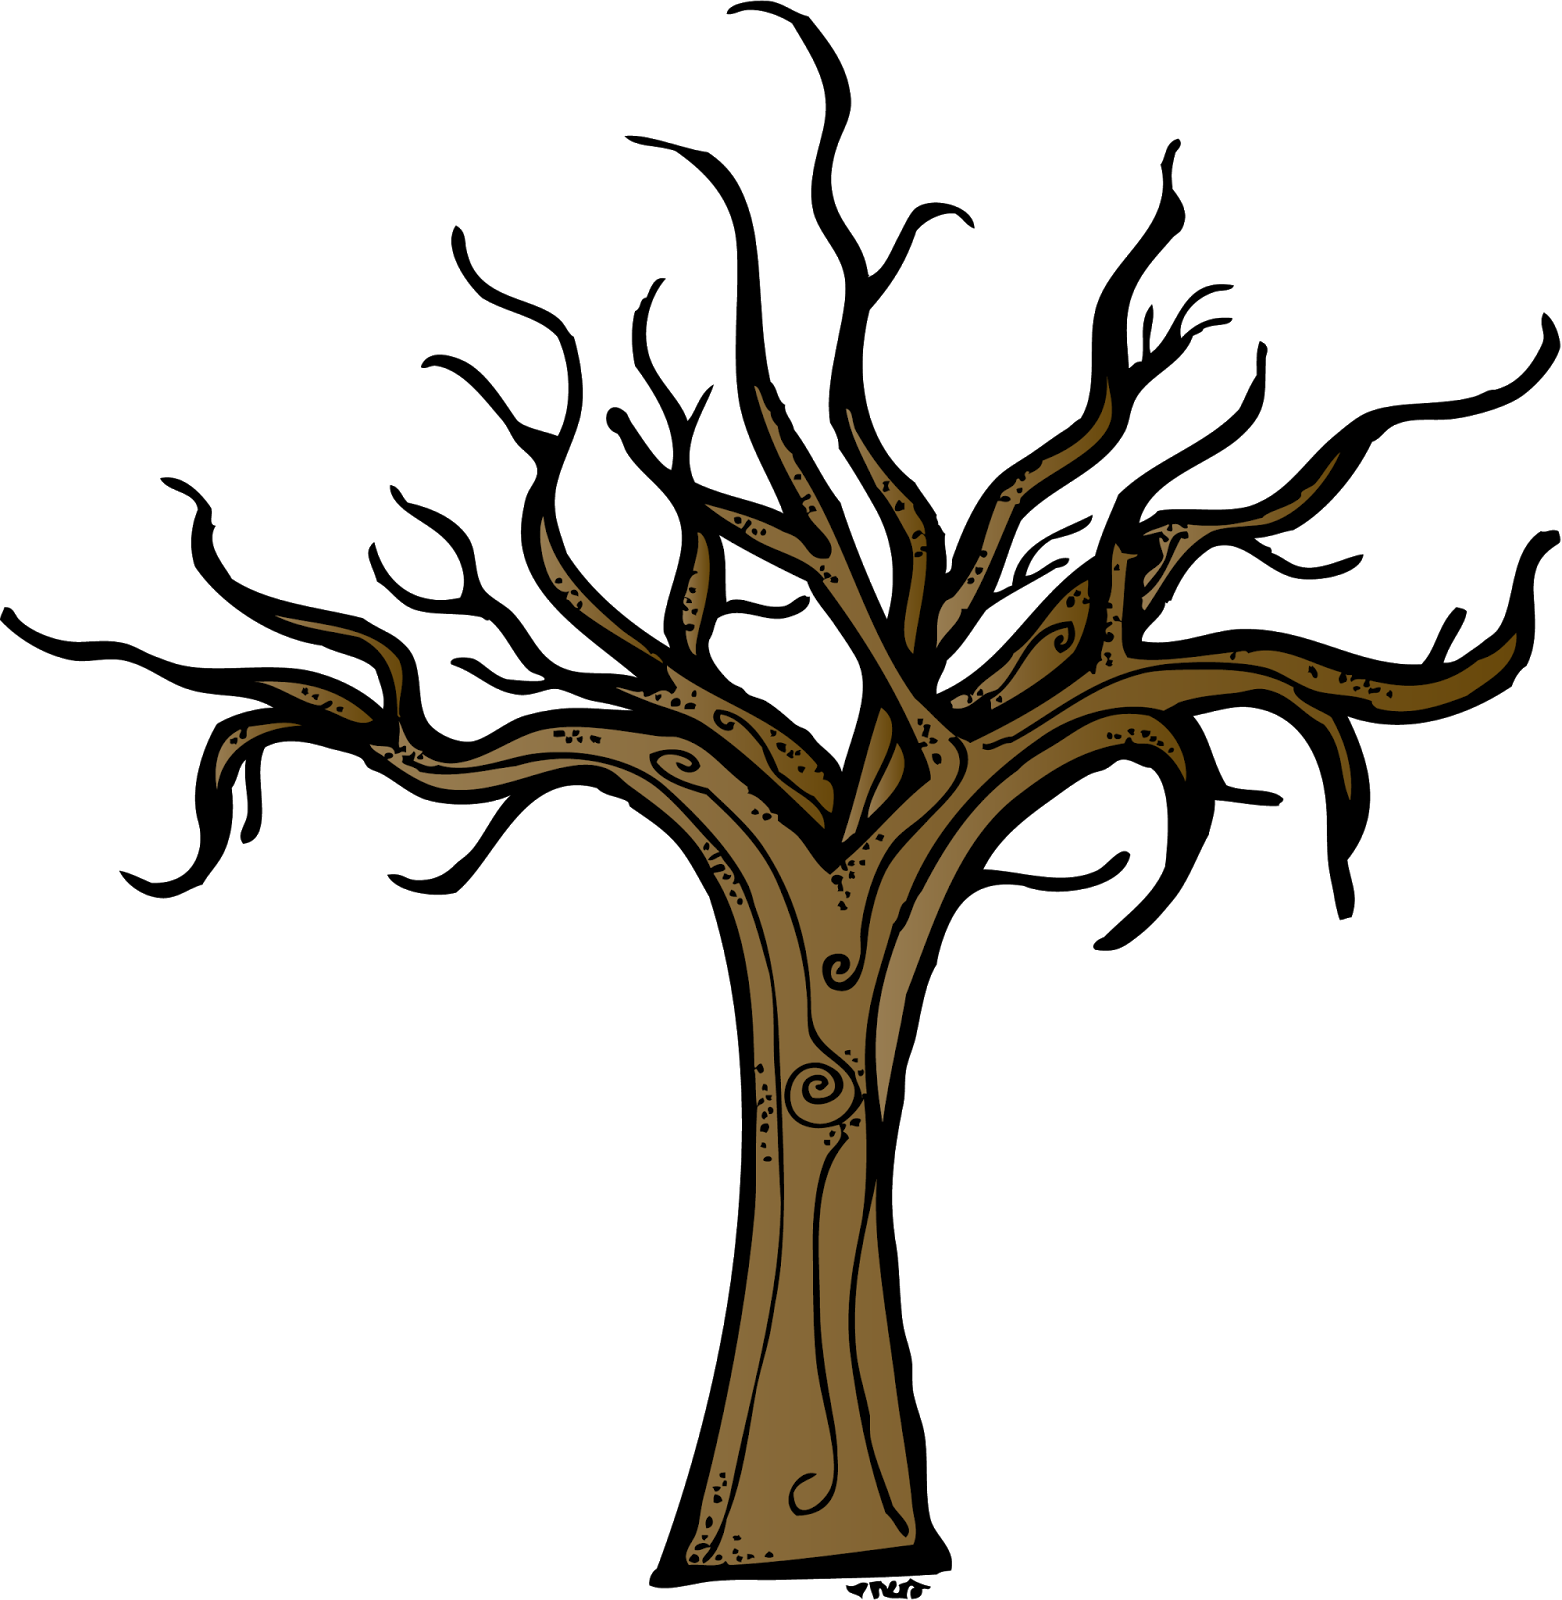 Leafless Tree Clipart - ClipArt Best - ClipArt Best